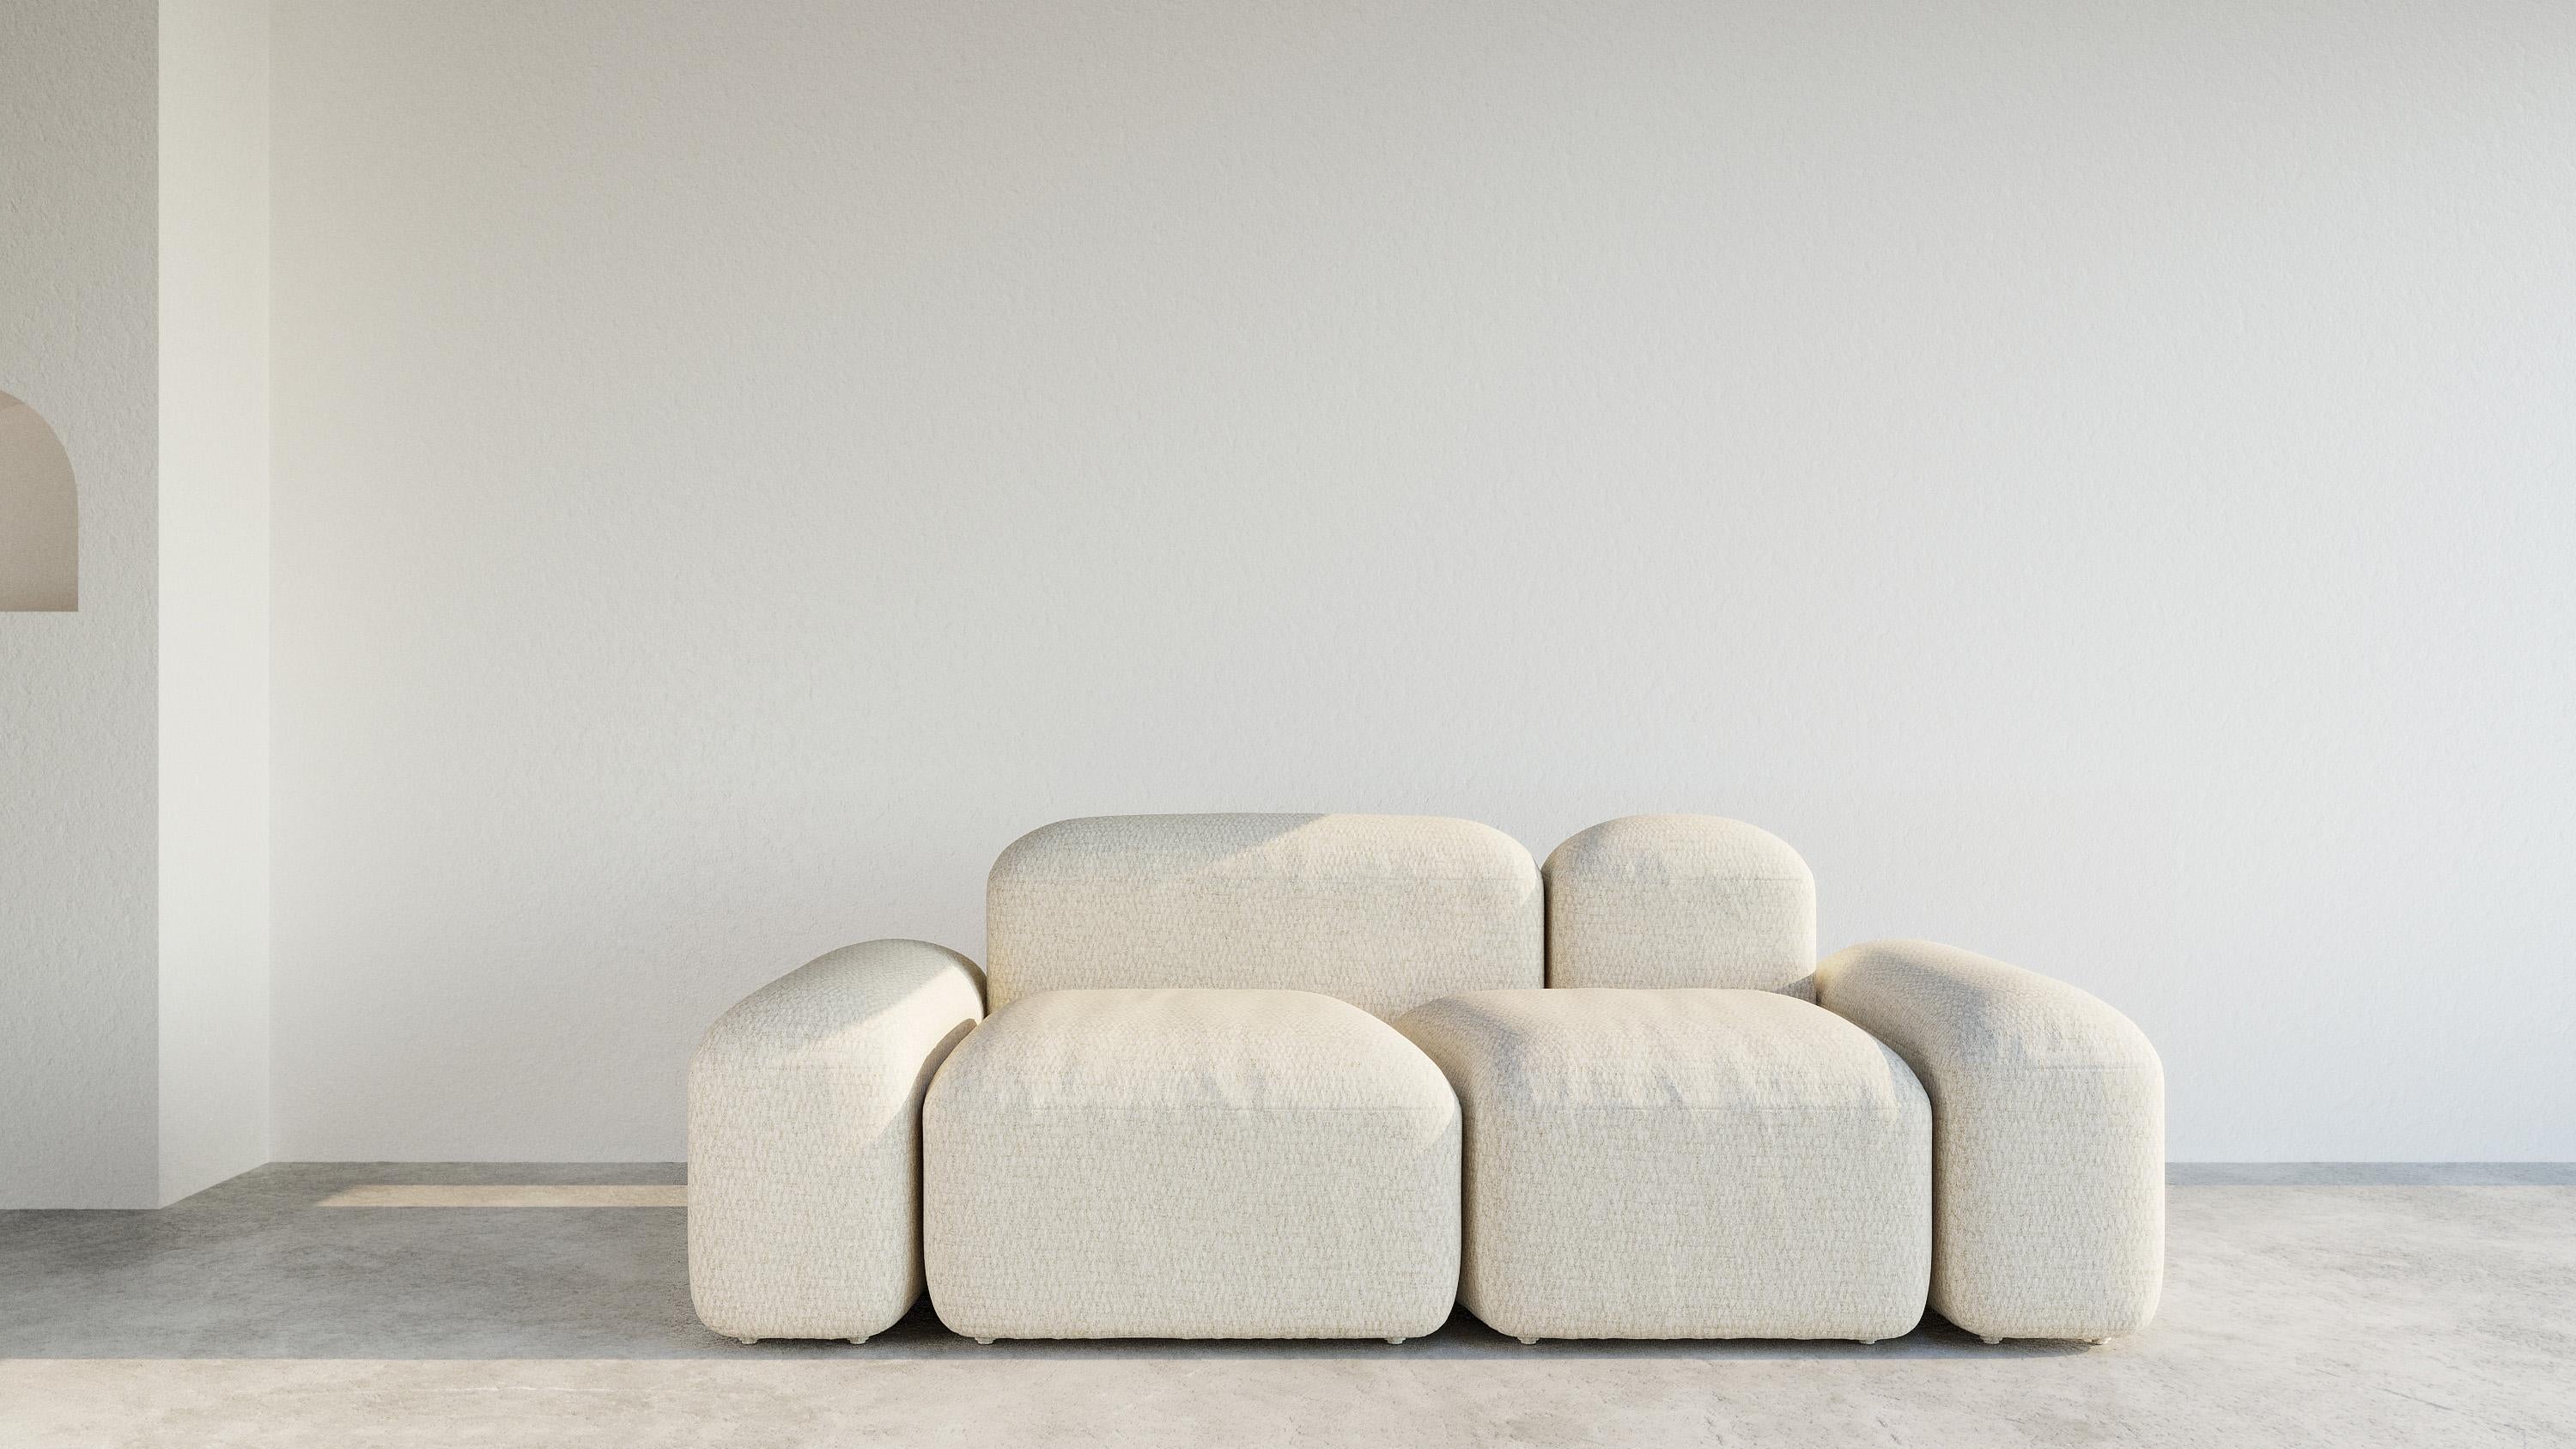 'Lapis' is a collection of sofas and seats with very organic and Minimalist shapes.
Designer: Emanuel Gargano
Maker: Amura Lab

LAPIS 045
2 seaters / 203cm L

'Lapis' can be made in several dimension and combinations, according to spaces and